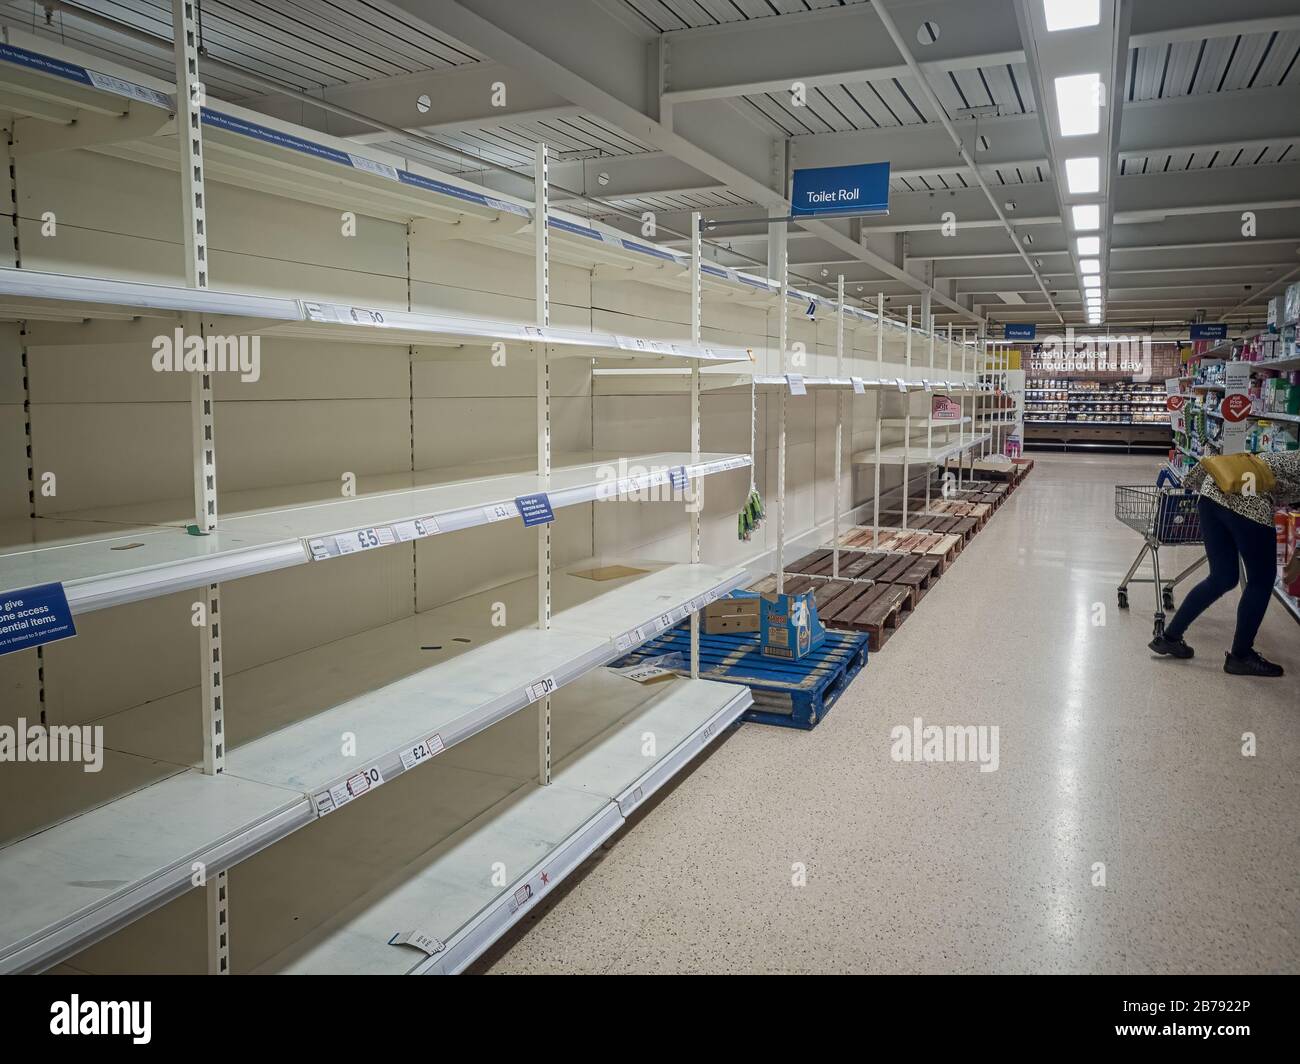 CHESTER, UNITED KINGDOM - MARCH 14th, 2020: A row of empty shelves in a supermarket after panic buying Stock Photo